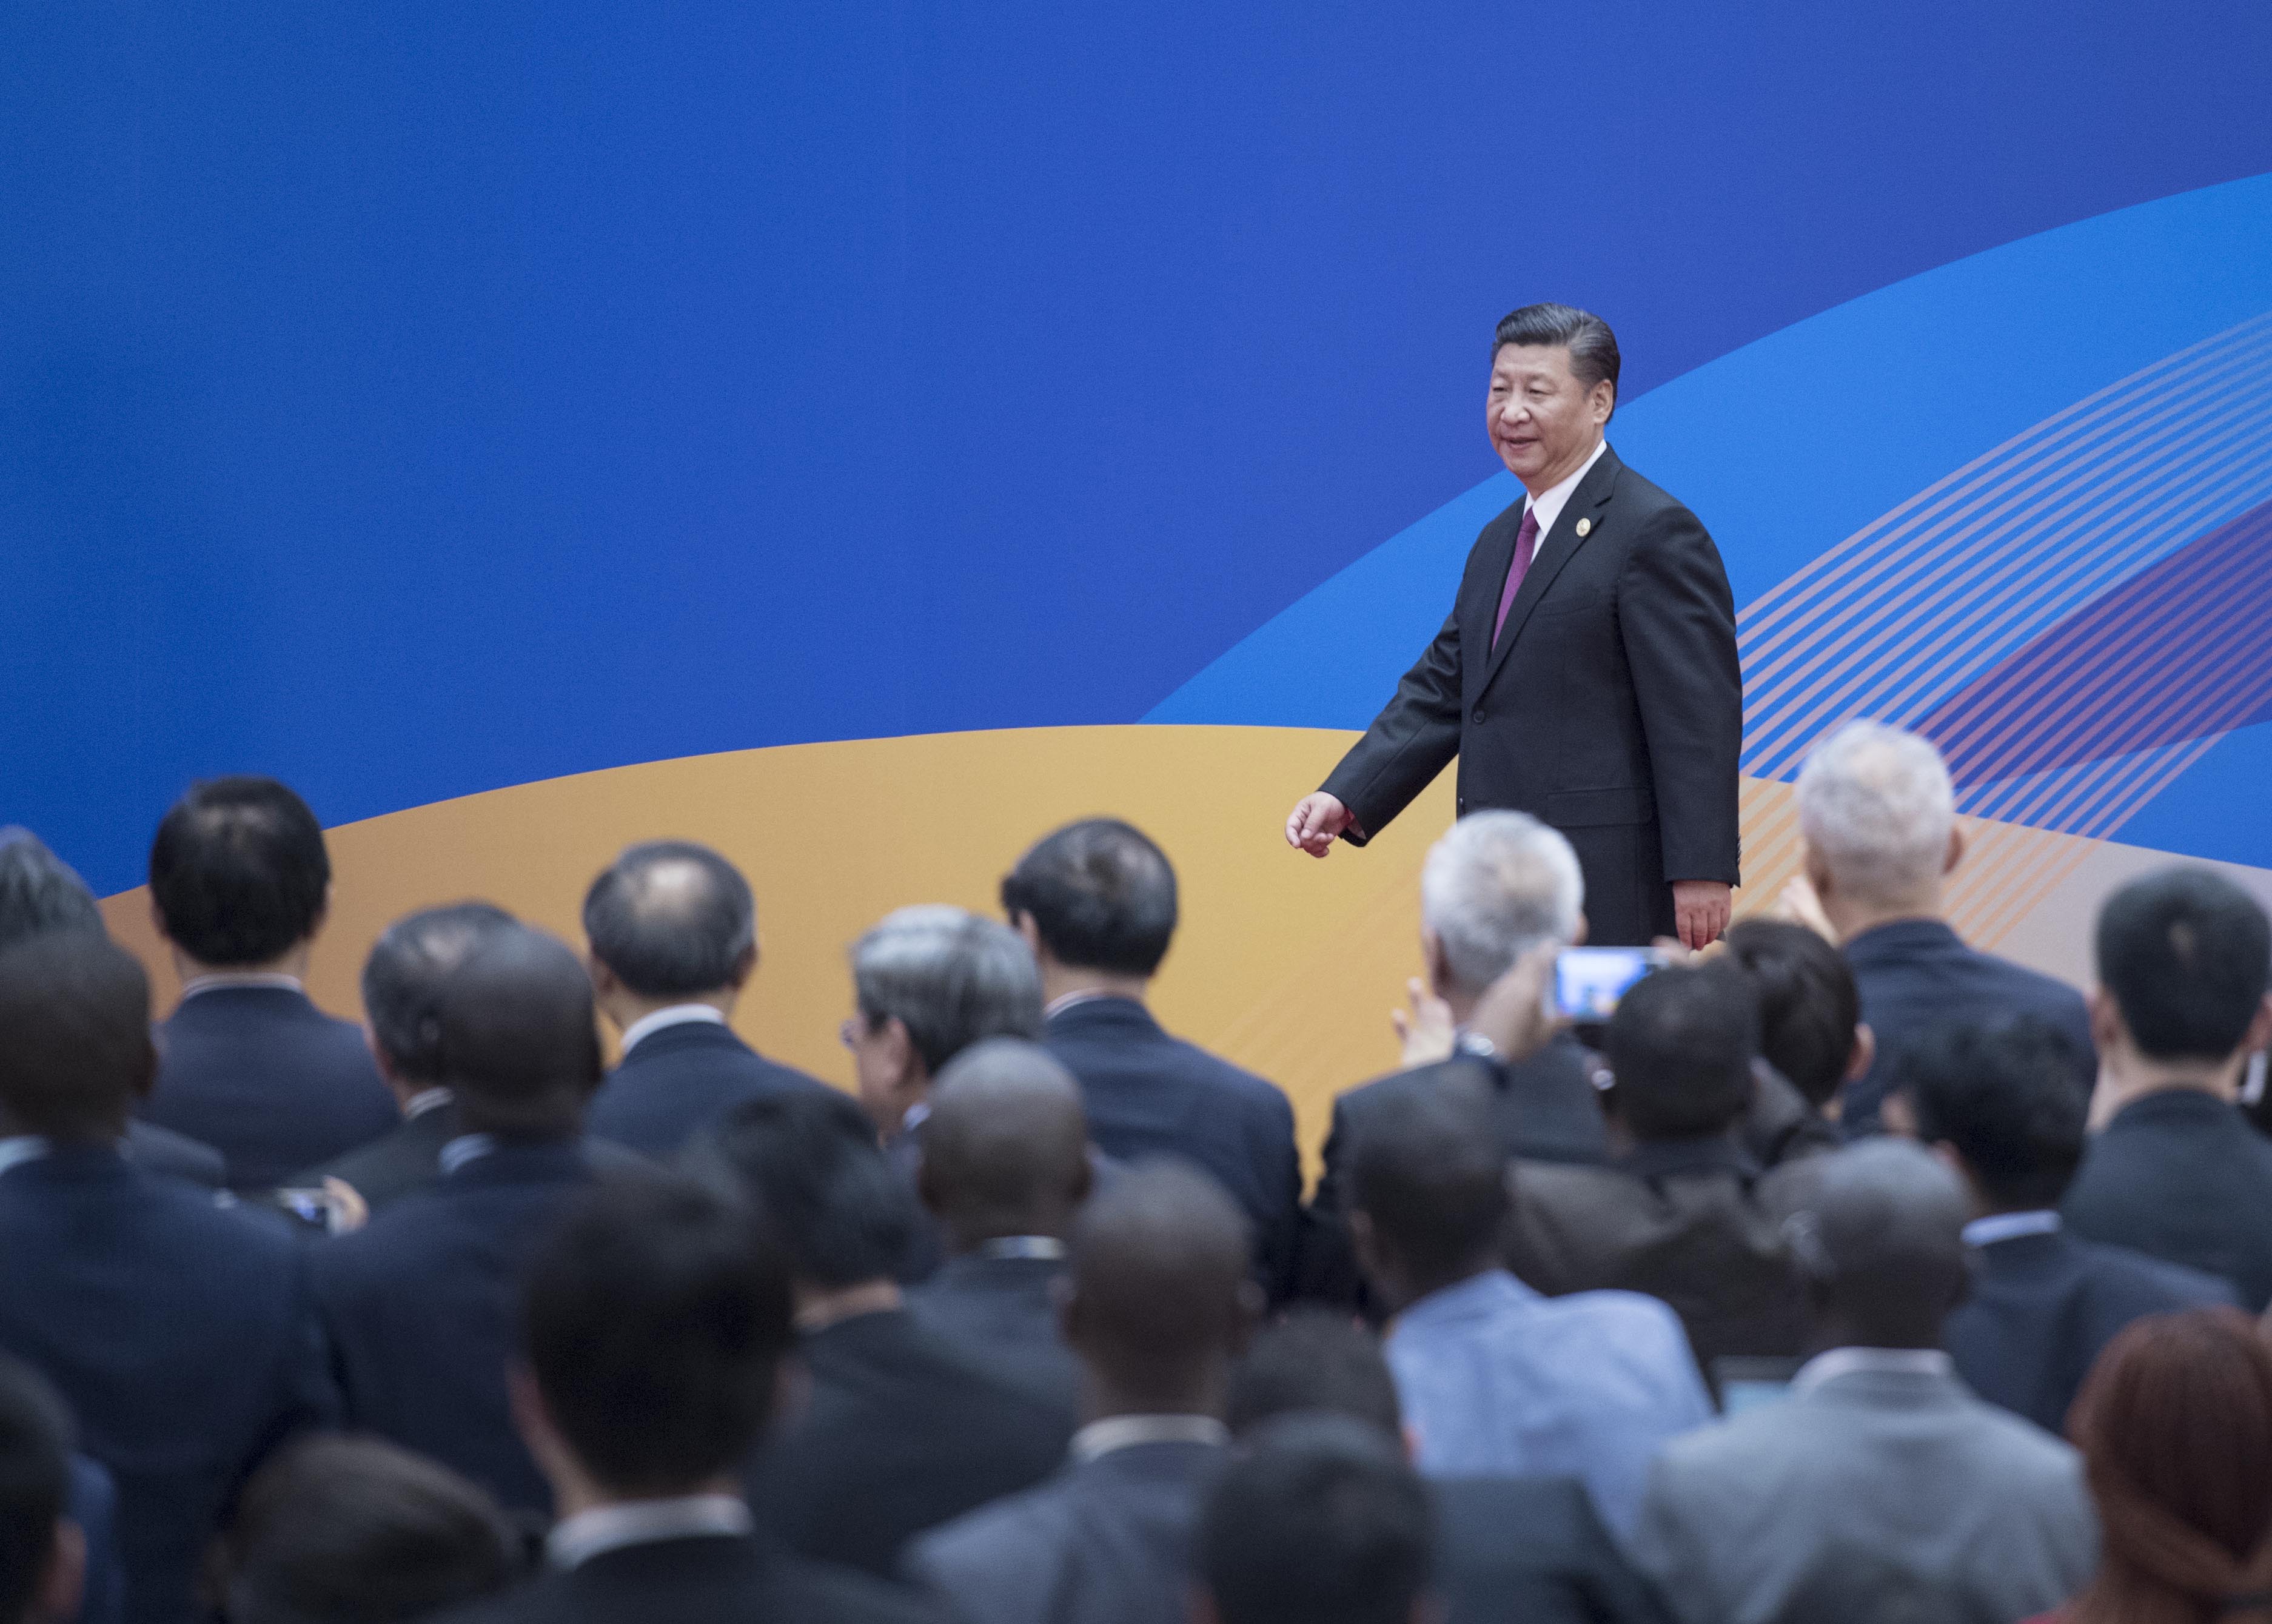 Chinese President Xi Jinping meets the press after the Leaders' Roundtable Summit at the Belt and Road Forum for International Cooperation in Beijing on May 15, 2017. Photo: Xinhua